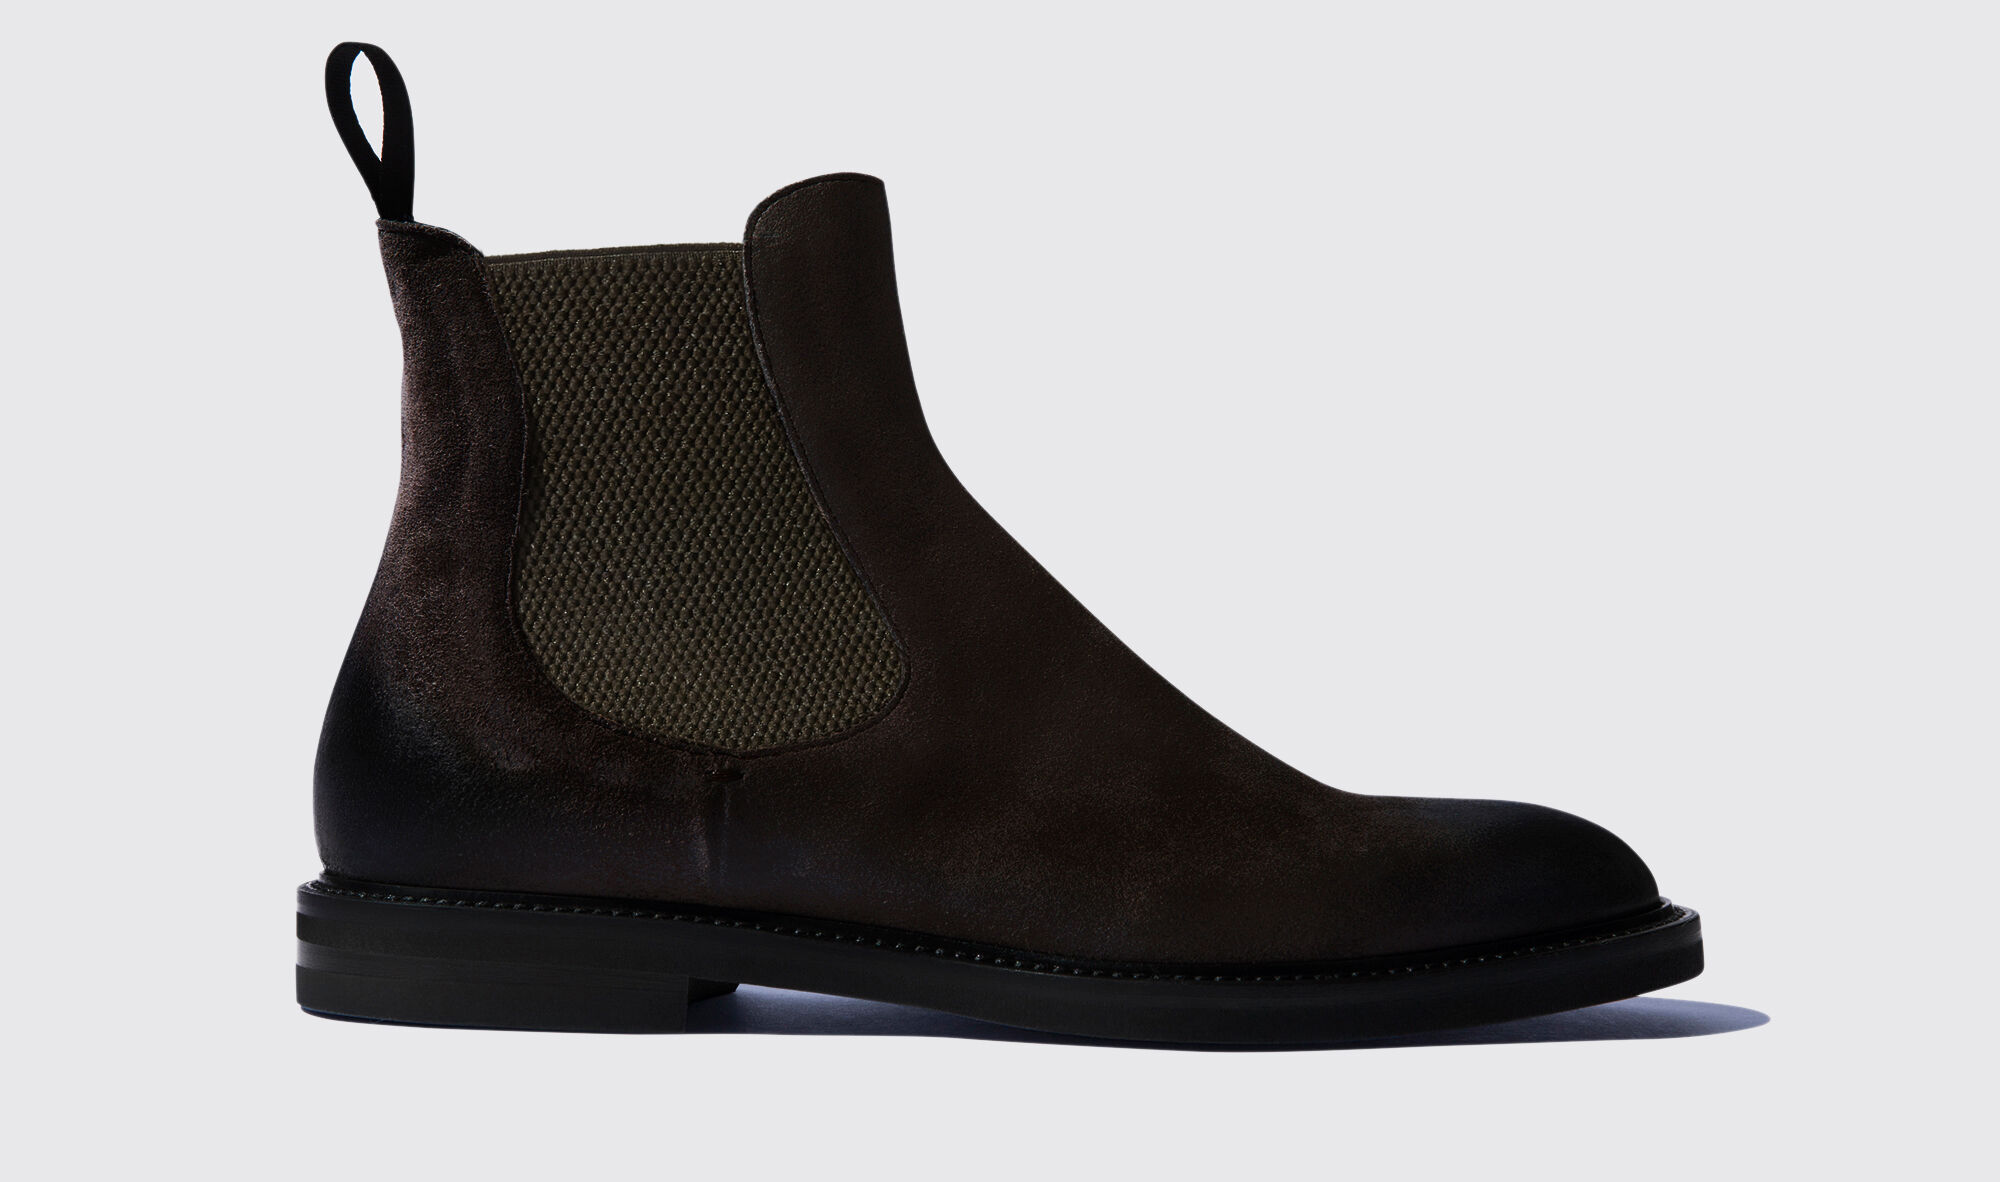 Scarosso Chelsea boots - Brown